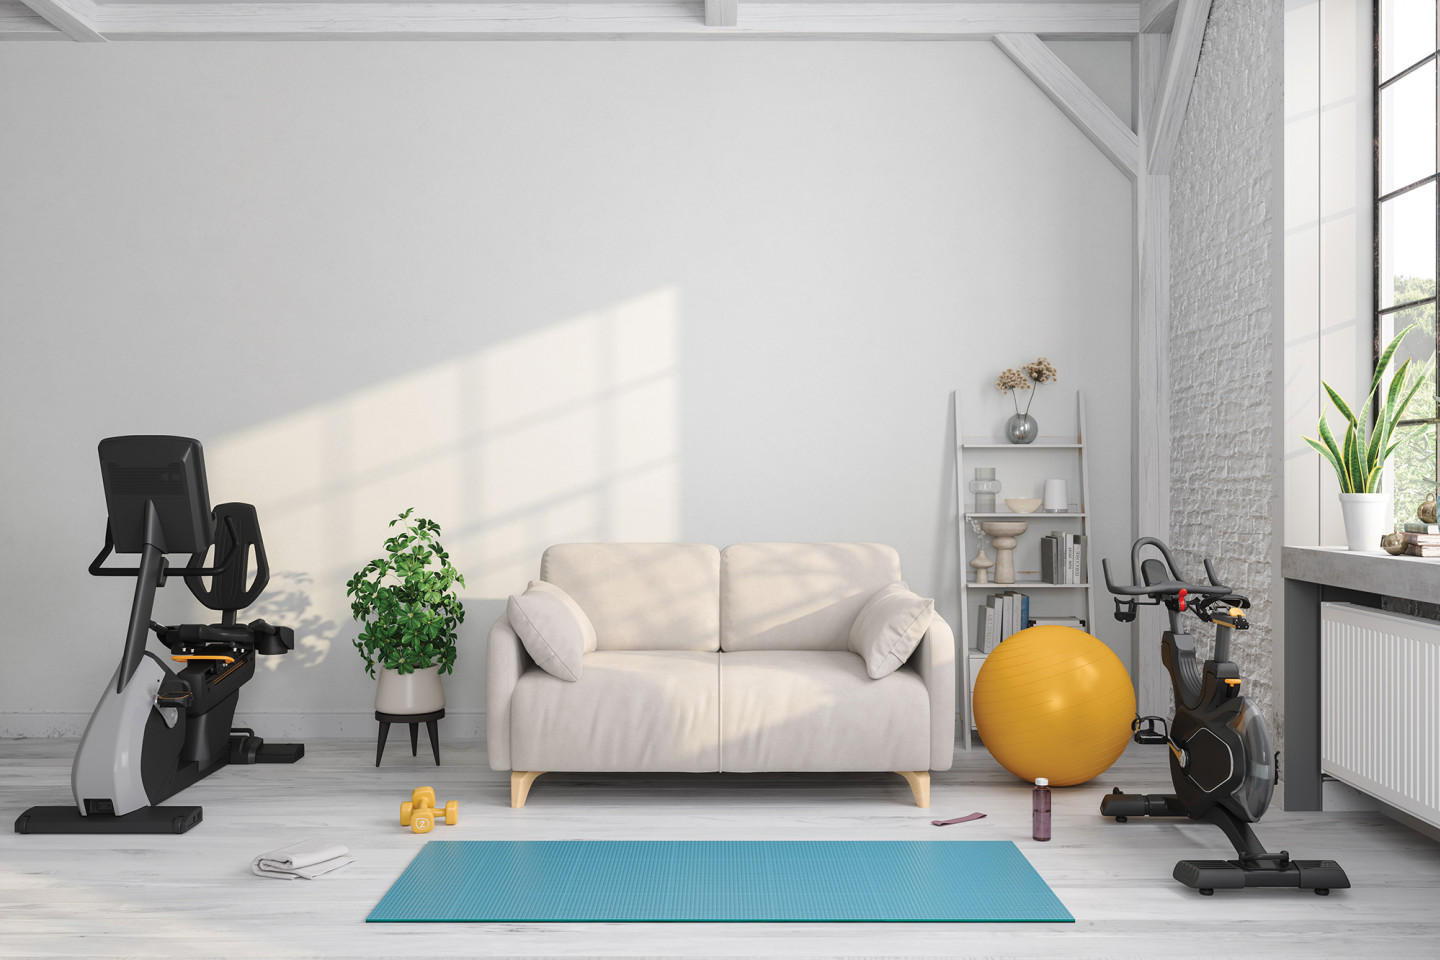 Exercise equipment in a room with livingroom furniture